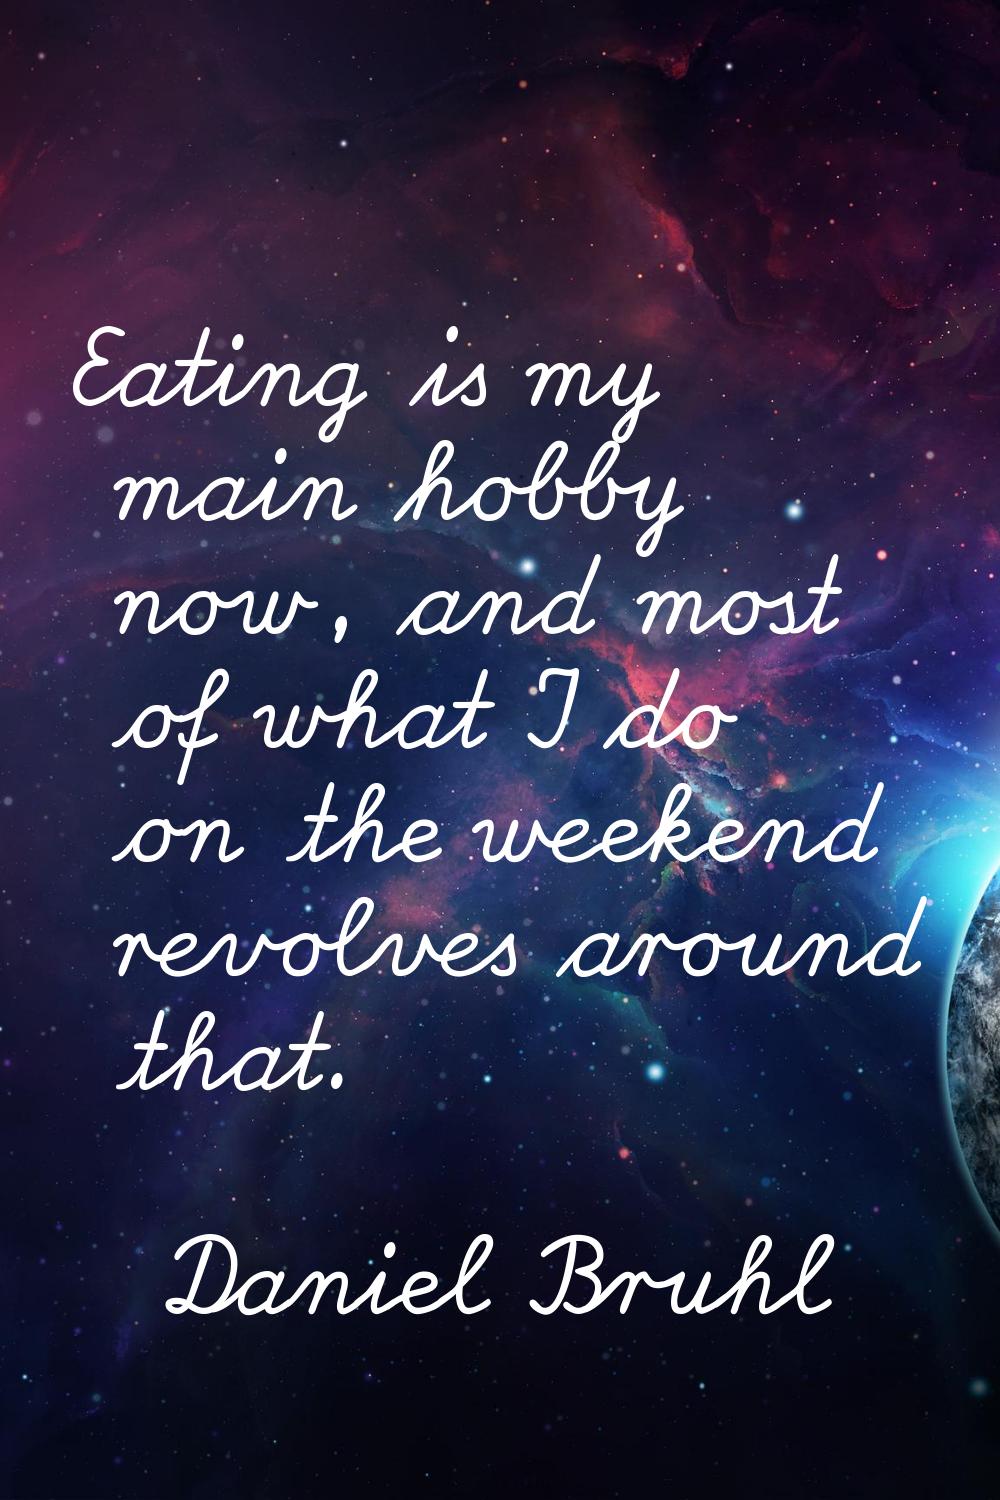 Eating is my main hobby now, and most of what I do on the weekend revolves around that.